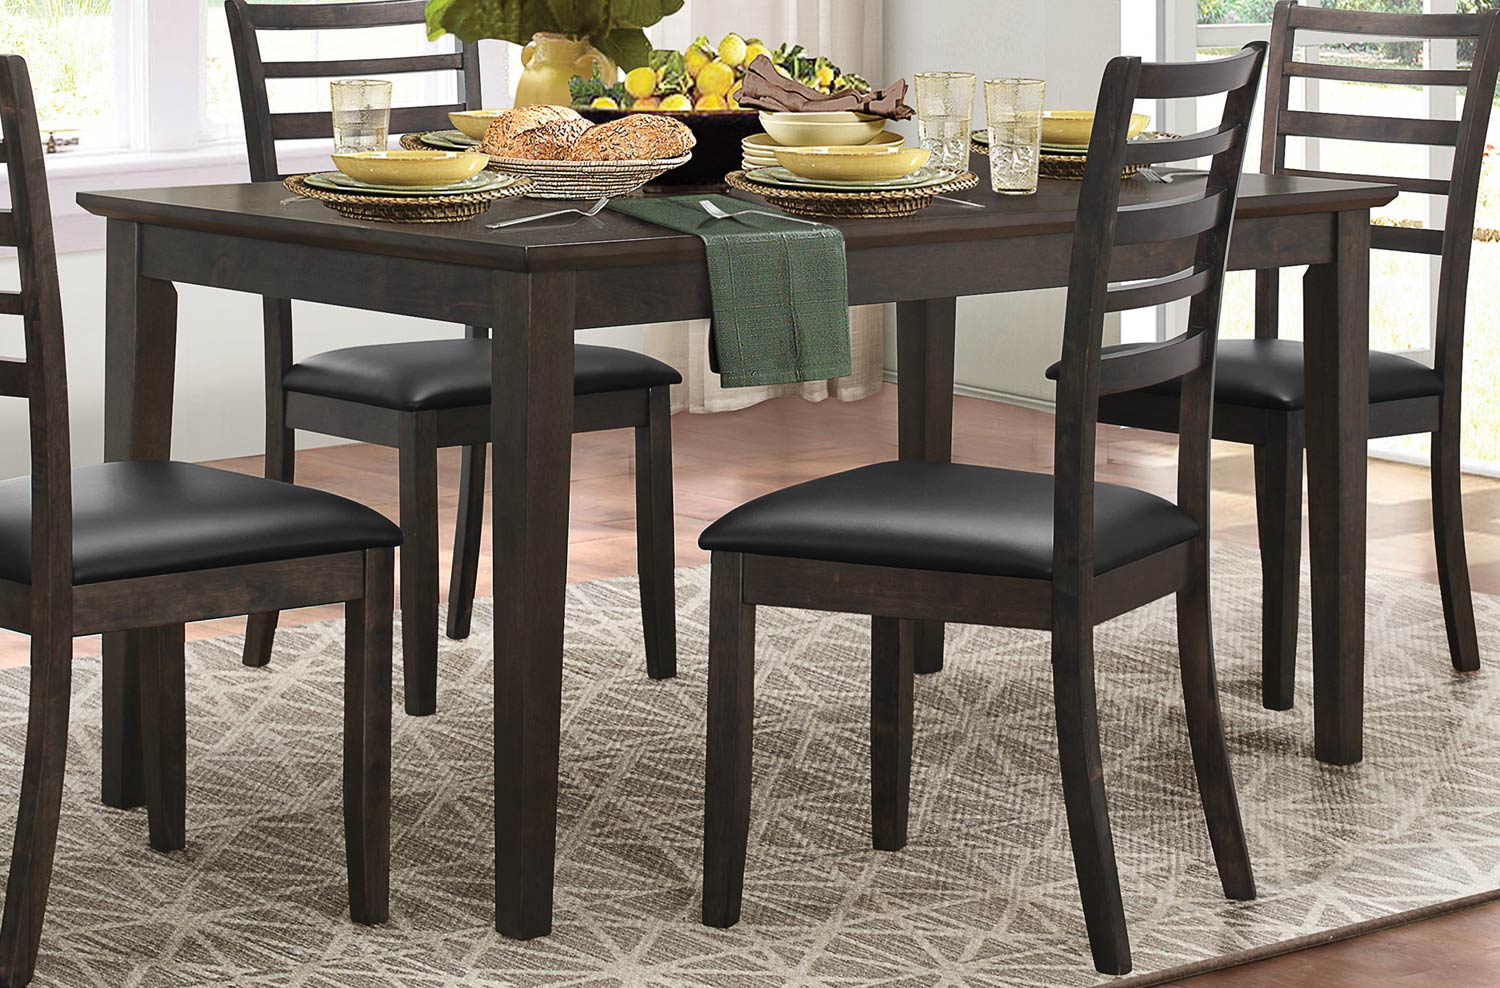 Homelegance Cabrillo Dining Table - Grey/Brown